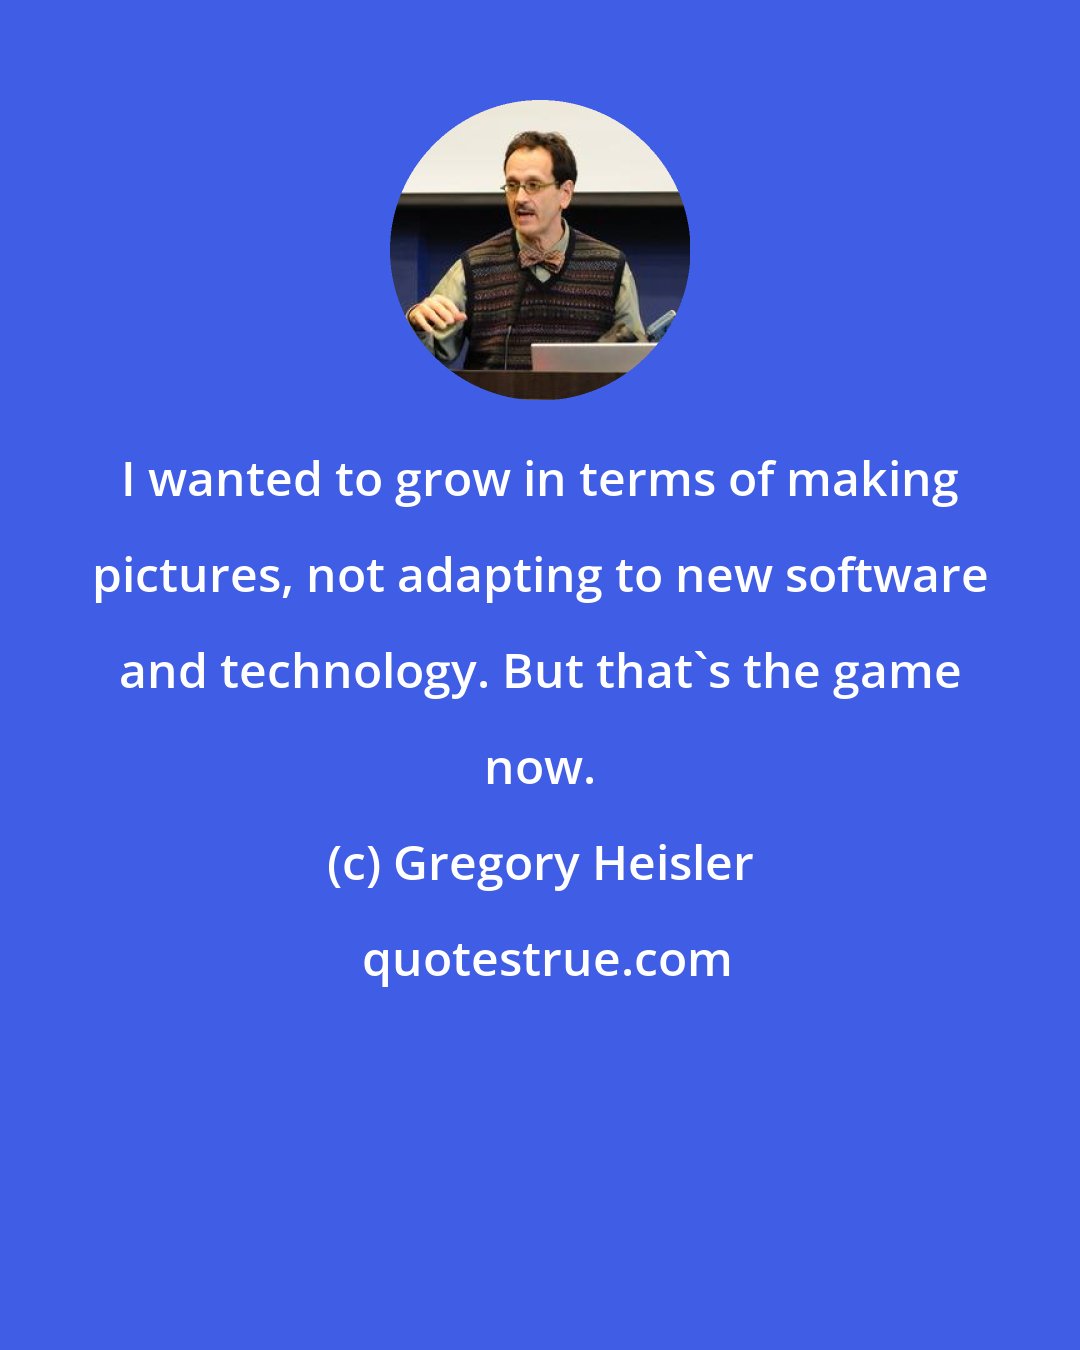 Gregory Heisler: I wanted to grow in terms of making pictures, not adapting to new software and technology. But that's the game now.